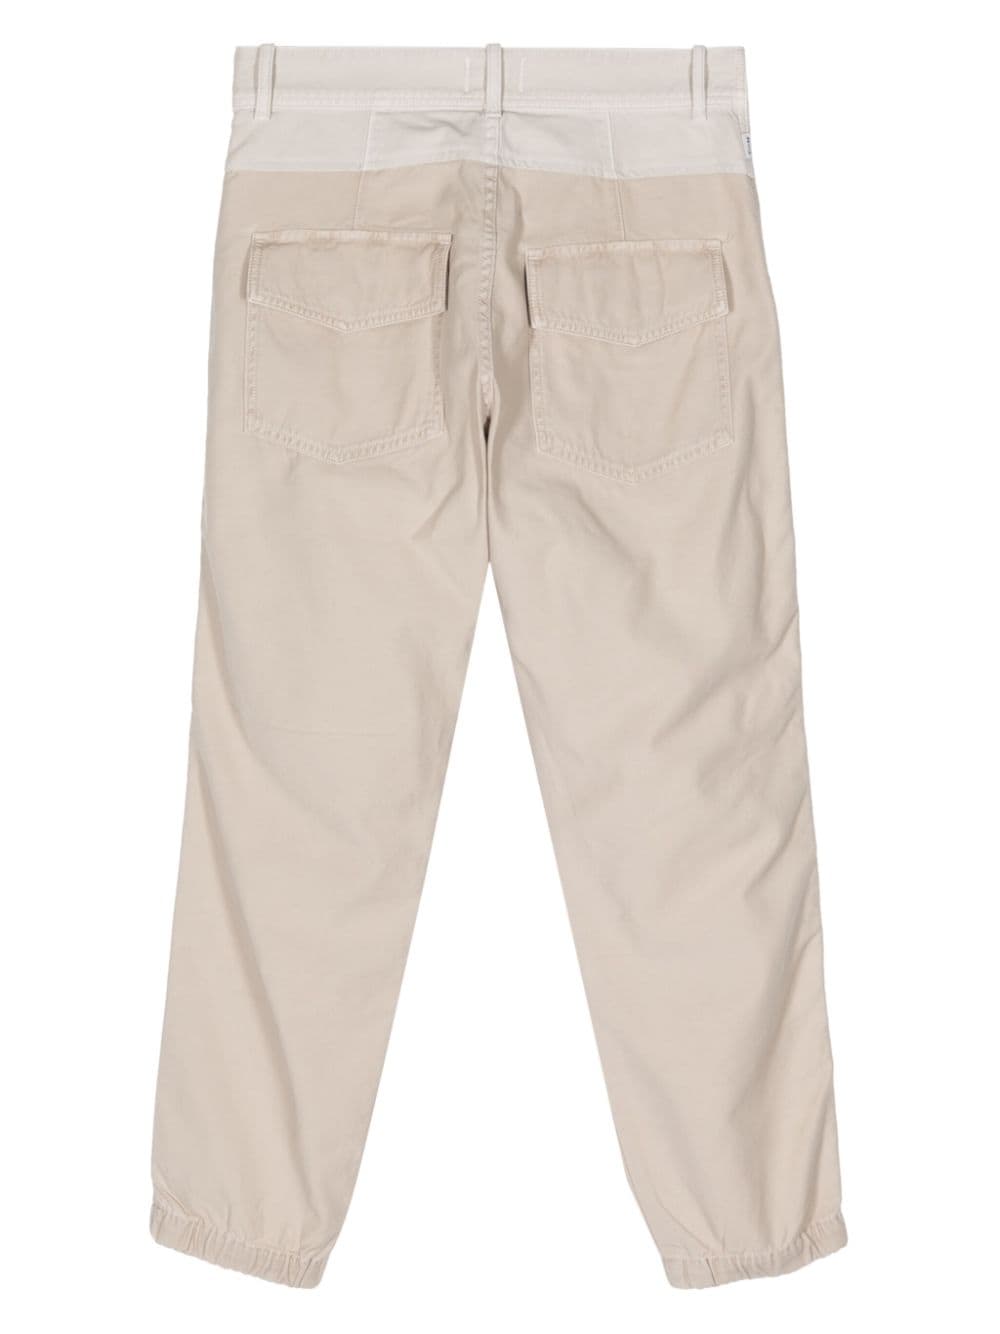 Citizens of Humanity Agni cotton trousers - Beige